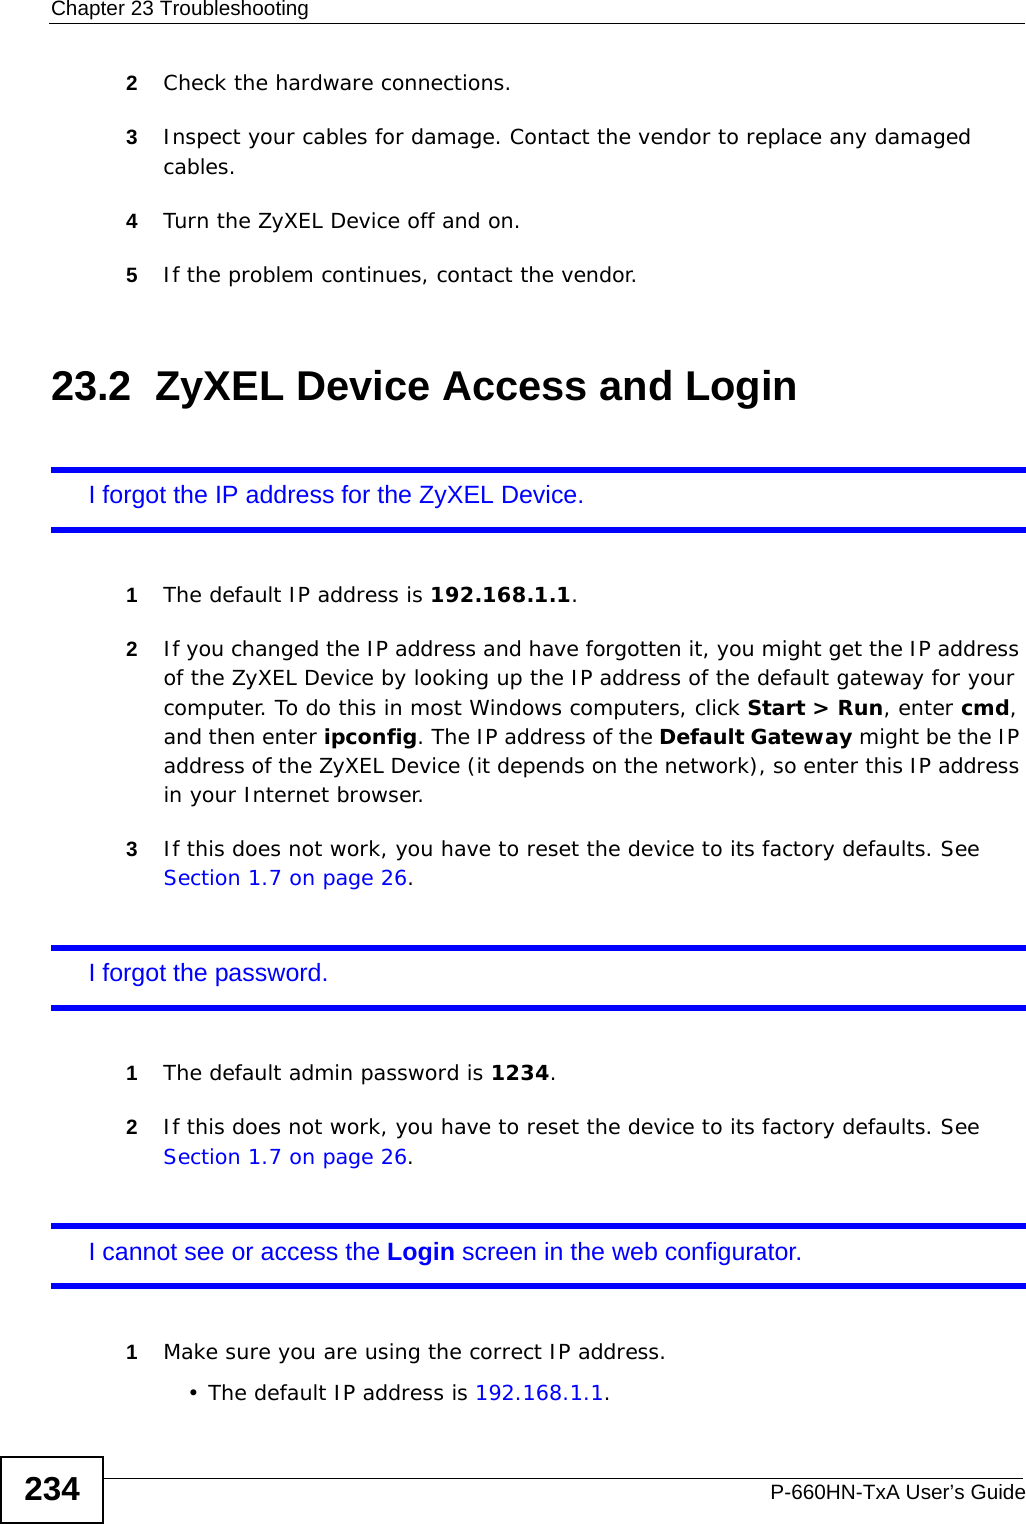 Chapter 23 TroubleshootingP-660HN-TxA User’s Guide2342Check the hardware connections.3Inspect your cables for damage. Contact the vendor to replace any damaged cables.4Turn the ZyXEL Device off and on.5If the problem continues, contact the vendor.23.2  ZyXEL Device Access and LoginI forgot the IP address for the ZyXEL Device.1The default IP address is 192.168.1.1.2If you changed the IP address and have forgotten it, you might get the IP address of the ZyXEL Device by looking up the IP address of the default gateway for your computer. To do this in most Windows computers, click Start &gt; Run, enter cmd, and then enter ipconfig. The IP address of the Default Gateway might be the IP address of the ZyXEL Device (it depends on the network), so enter this IP address in your Internet browser.3If this does not work, you have to reset the device to its factory defaults. See Section 1.7 on page 26.I forgot the password.1The default admin password is 1234.2If this does not work, you have to reset the device to its factory defaults. See Section 1.7 on page 26.I cannot see or access the Login screen in the web configurator.1Make sure you are using the correct IP address.• The default IP address is 192.168.1.1.